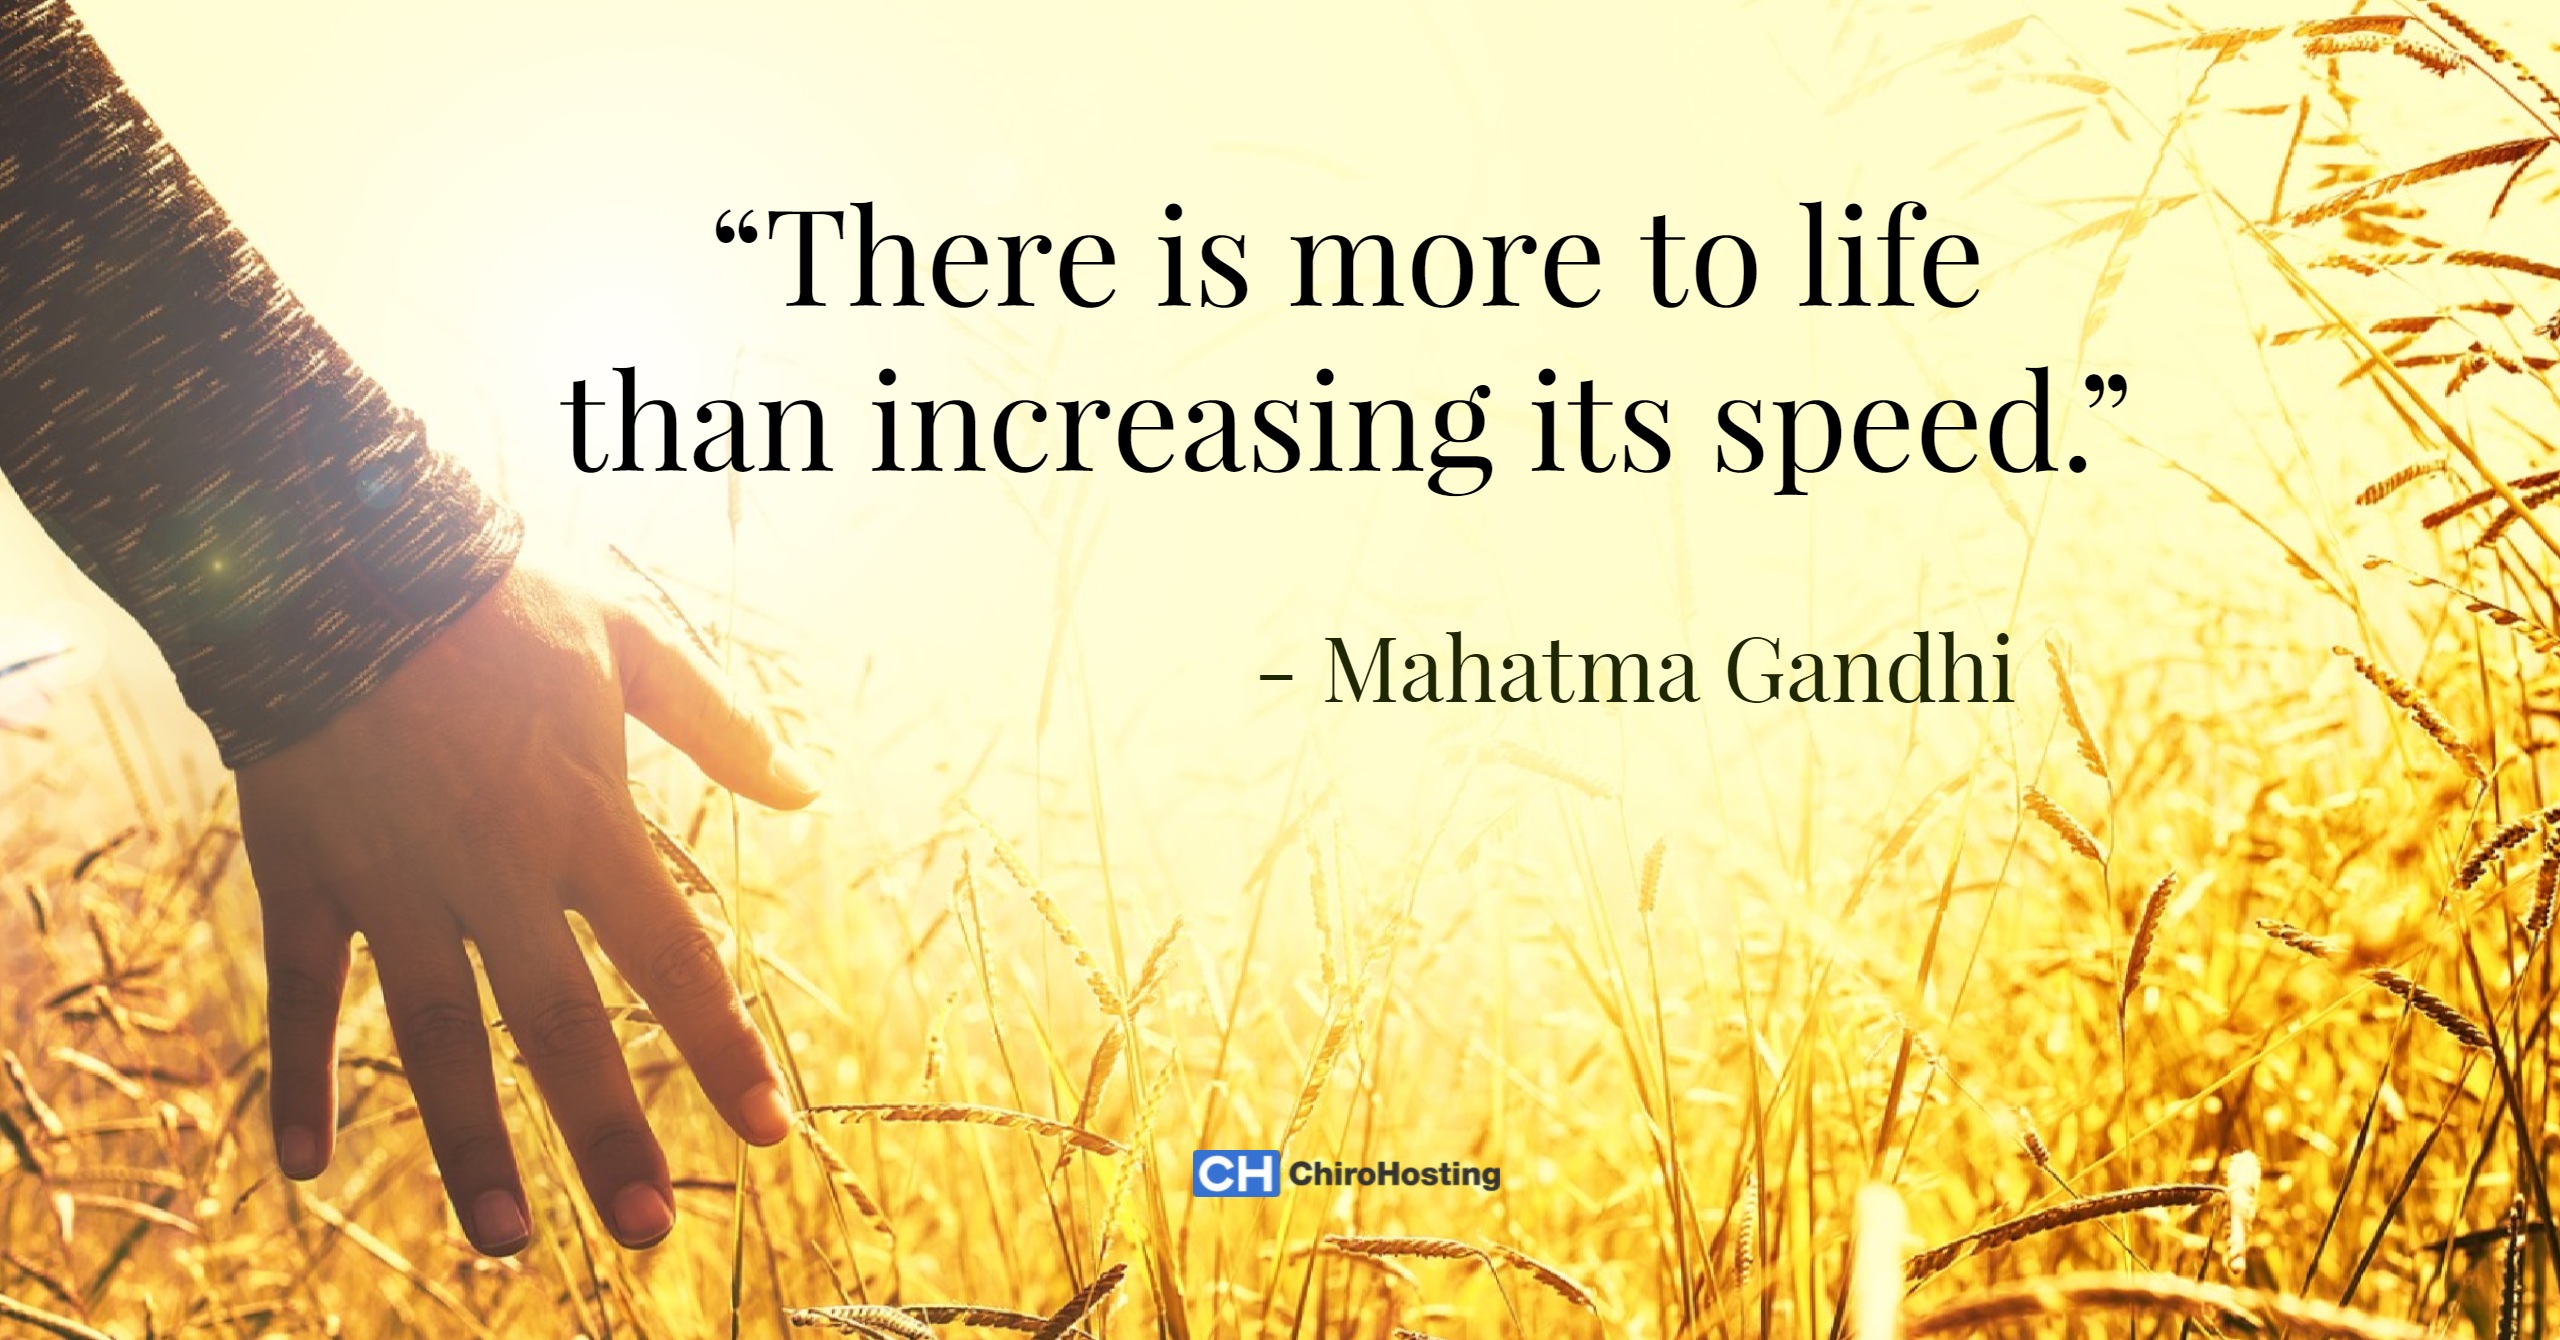 There Is More to Life Than Increasing Its Speed